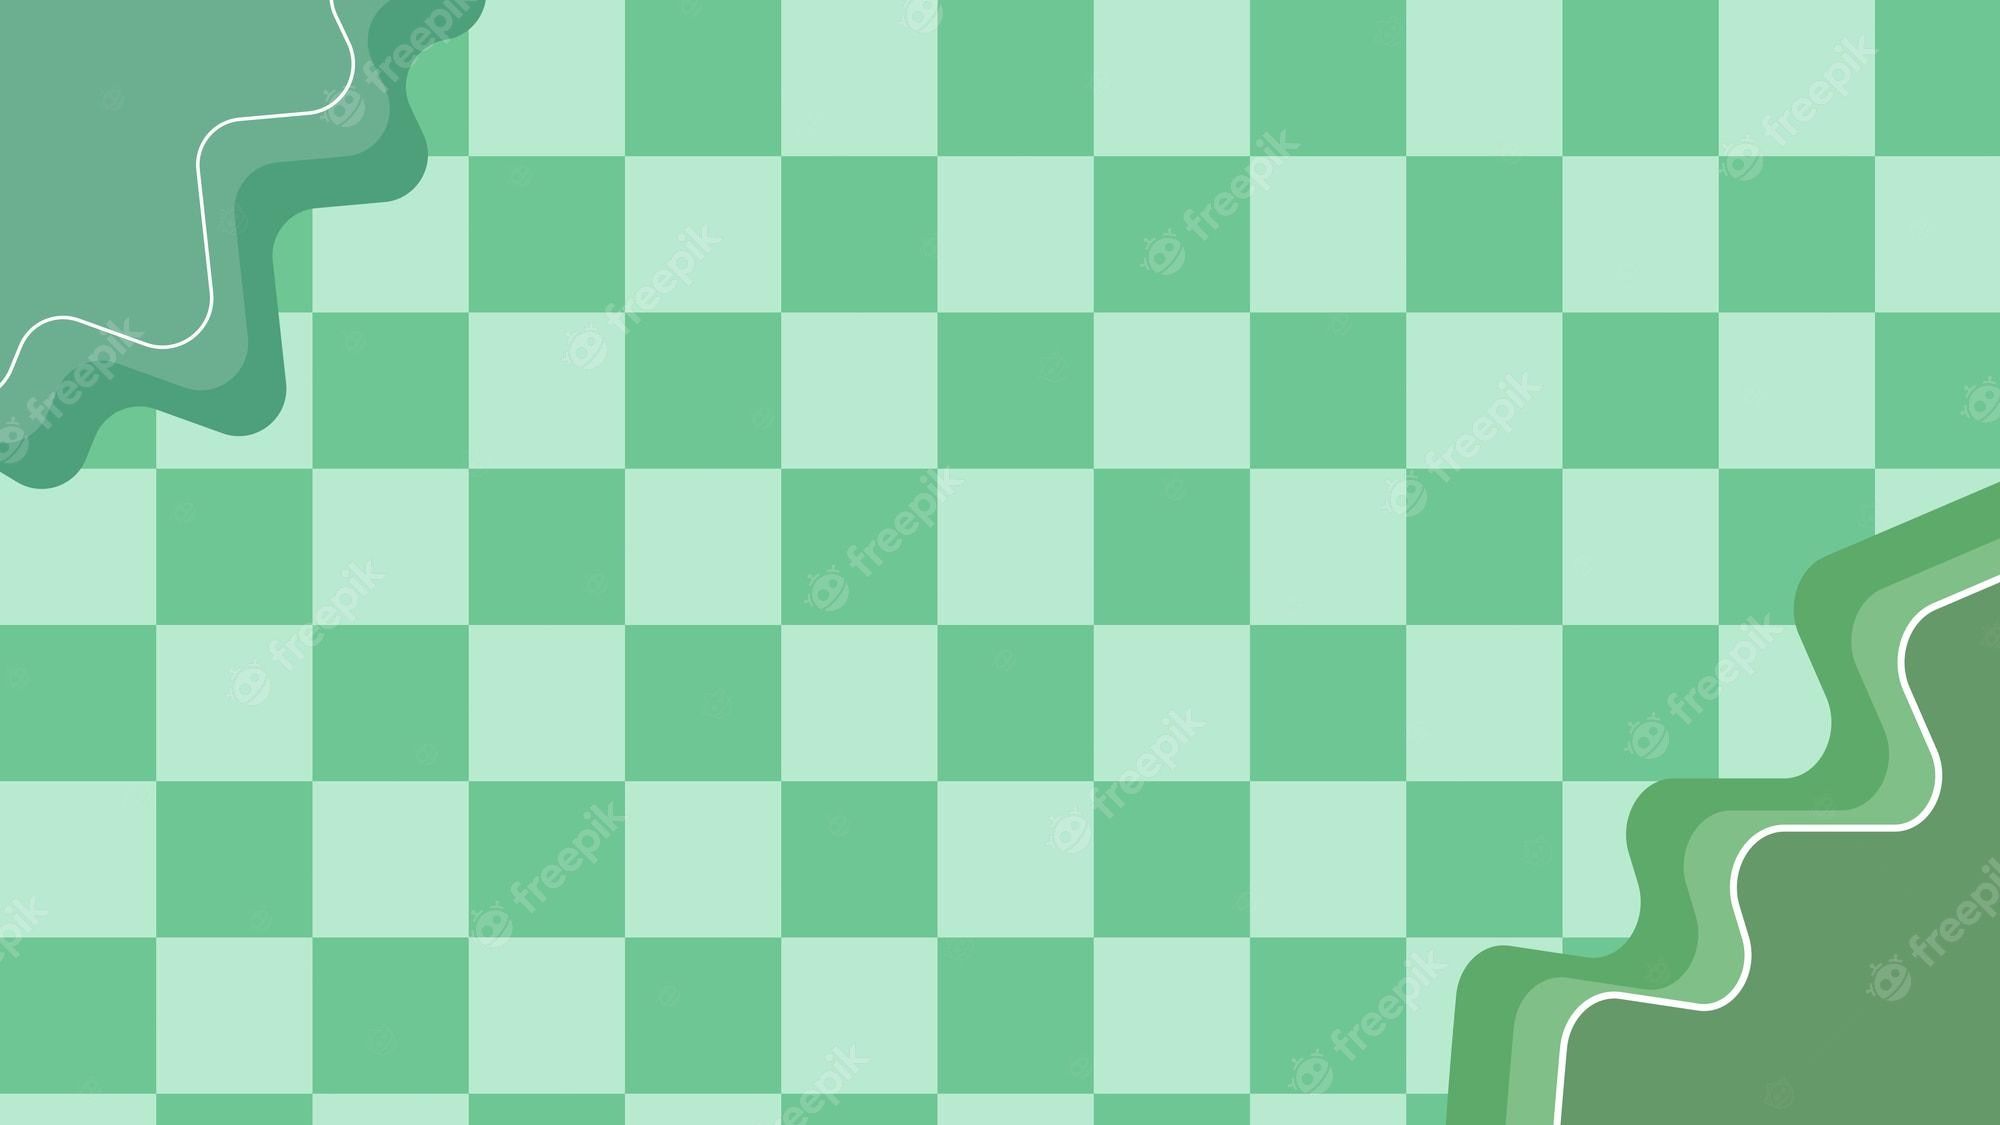 Chessboard background with green cells and a green abstract shape - Light green